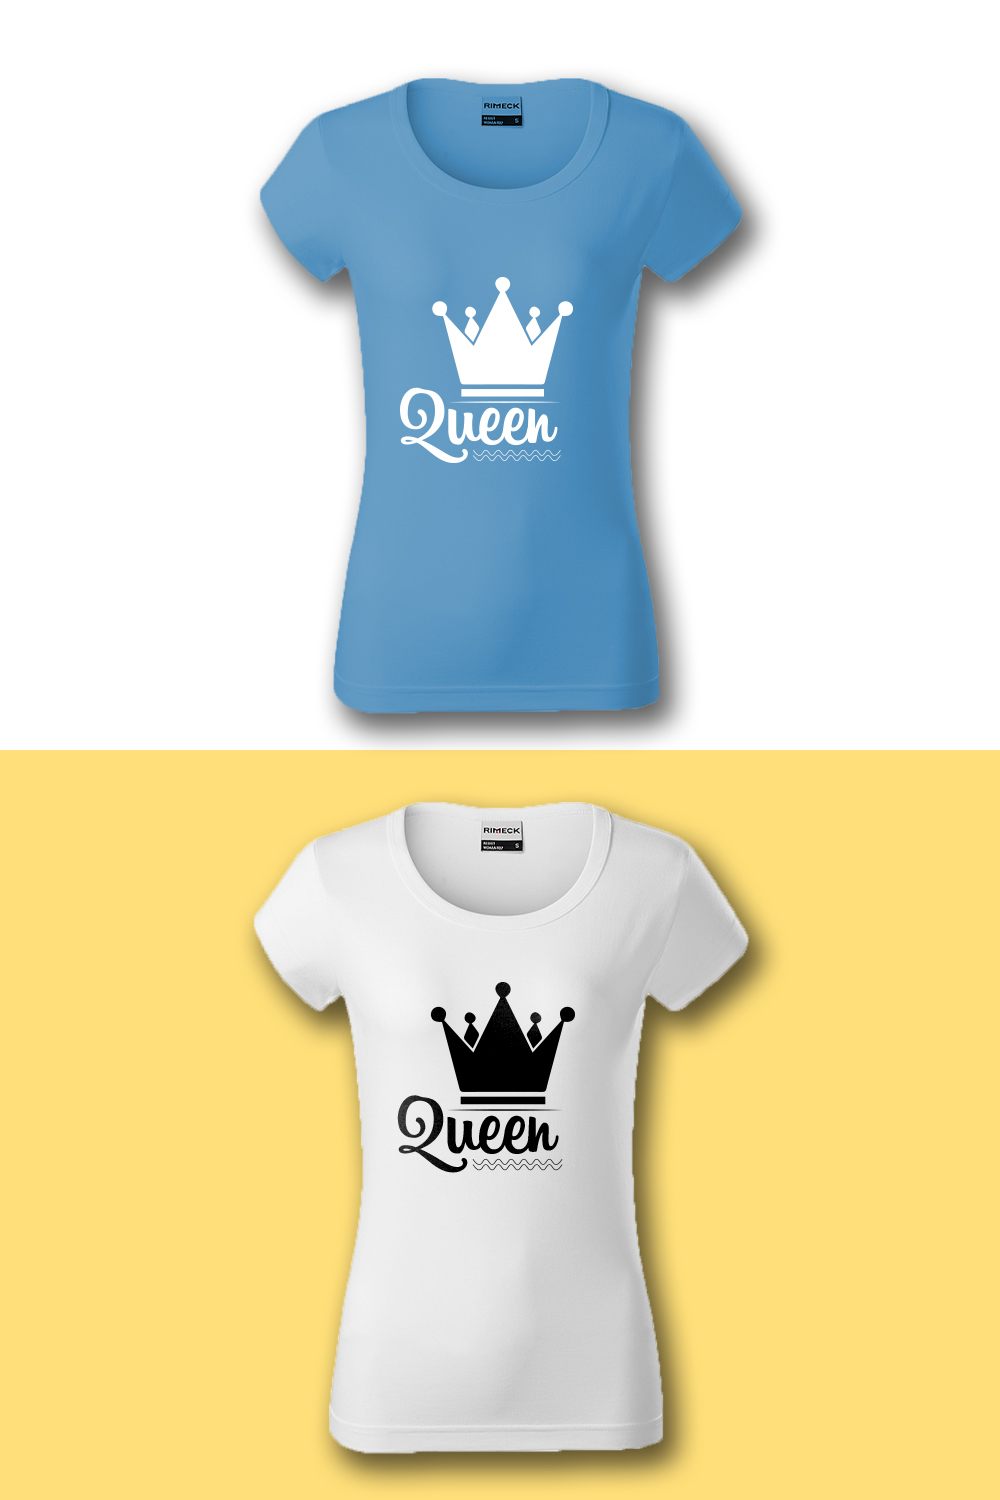 Set of t-shirt images with elegant prints of queen crowns